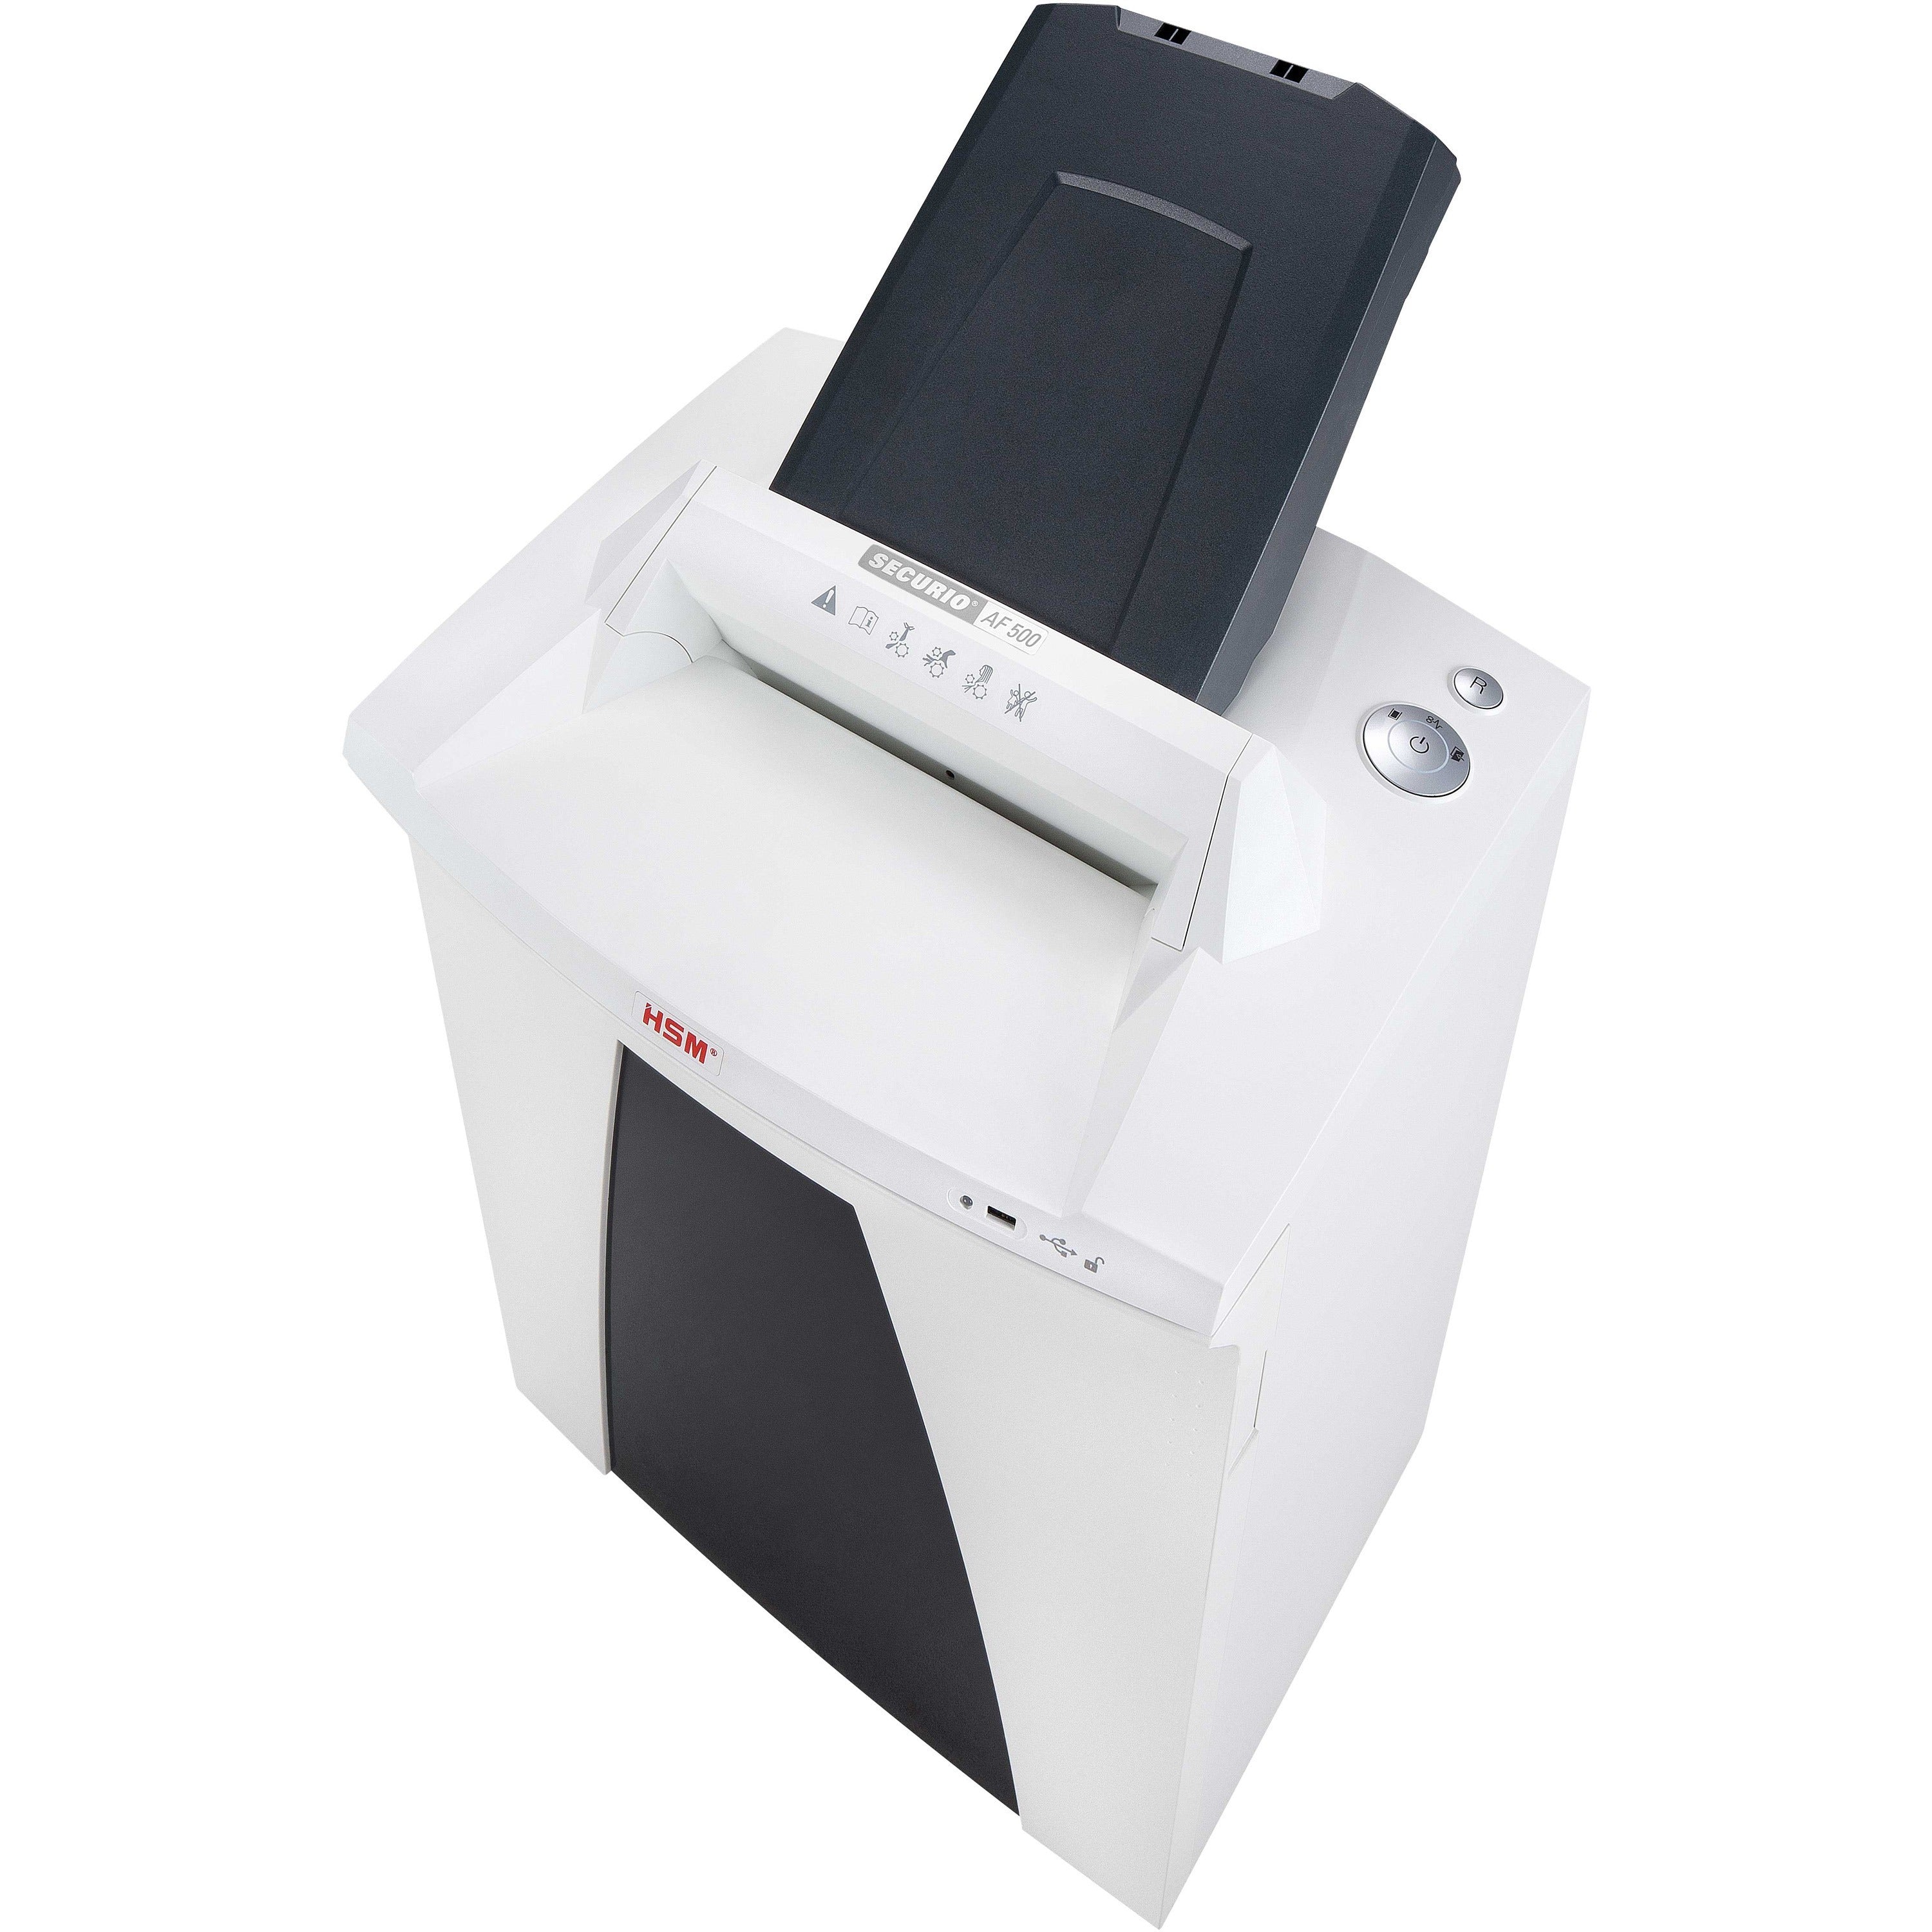 HSM SECURIO AF500 L5 Cross-Cut Shredder with Automatic Paper Feed; includes automatic oiler, HSM2105113O